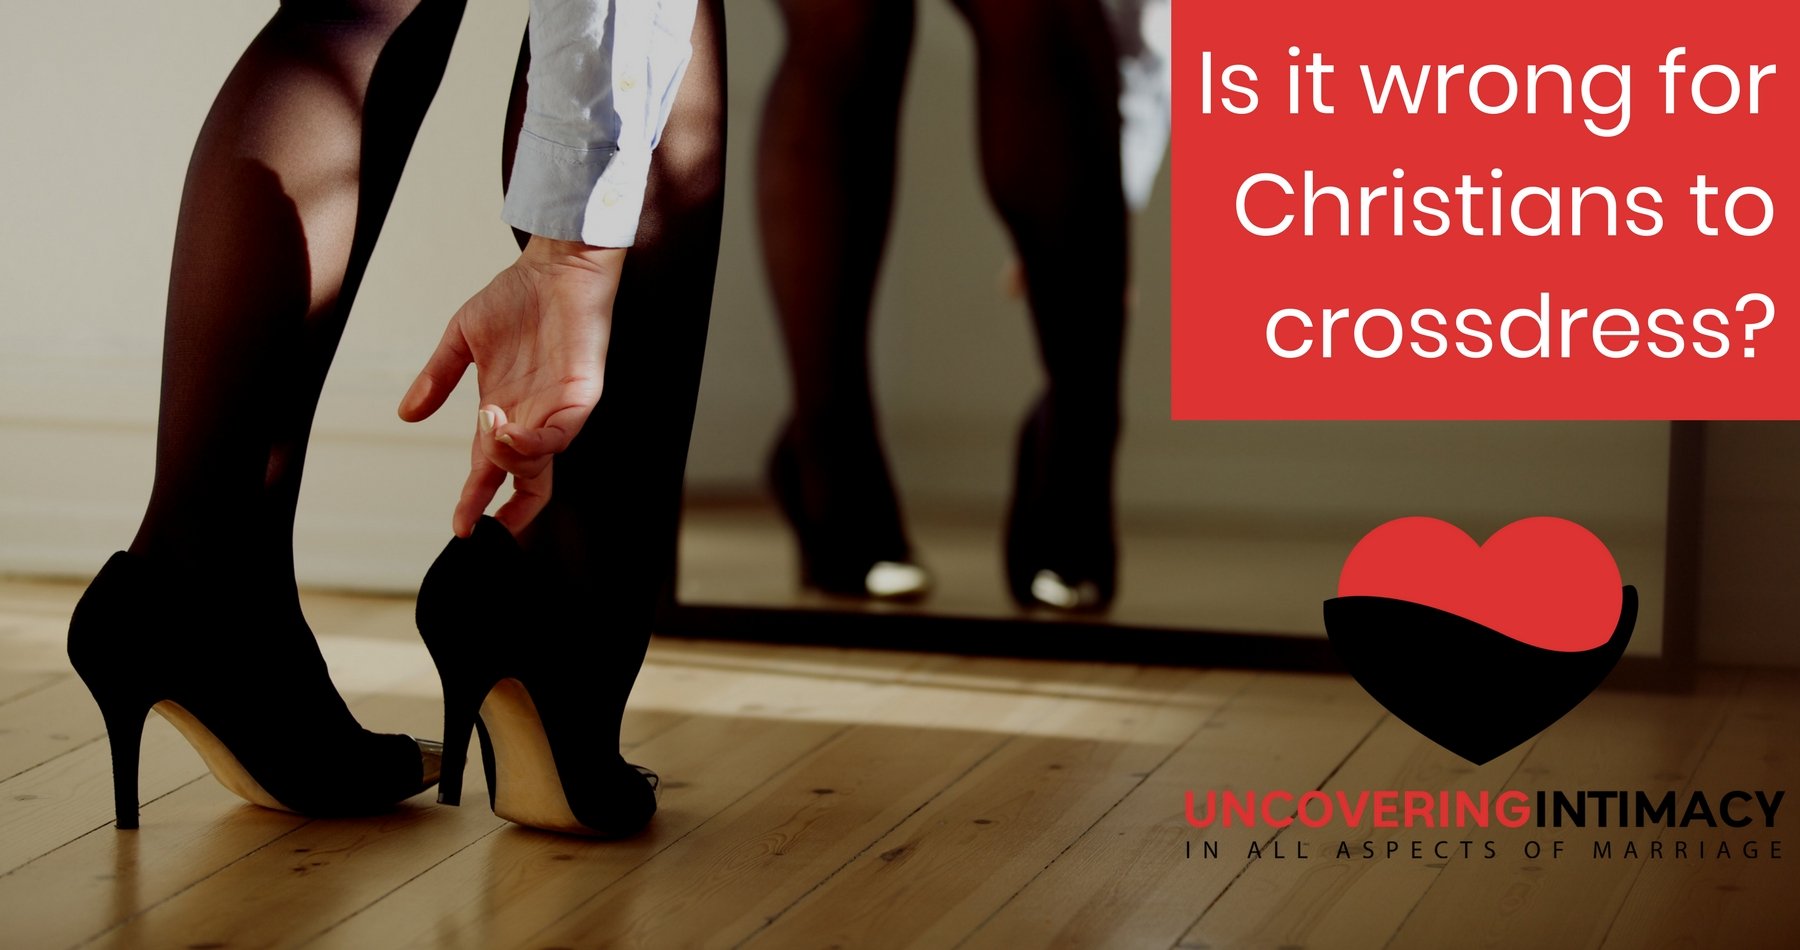 Is it wrong for Christians to crossdress? image